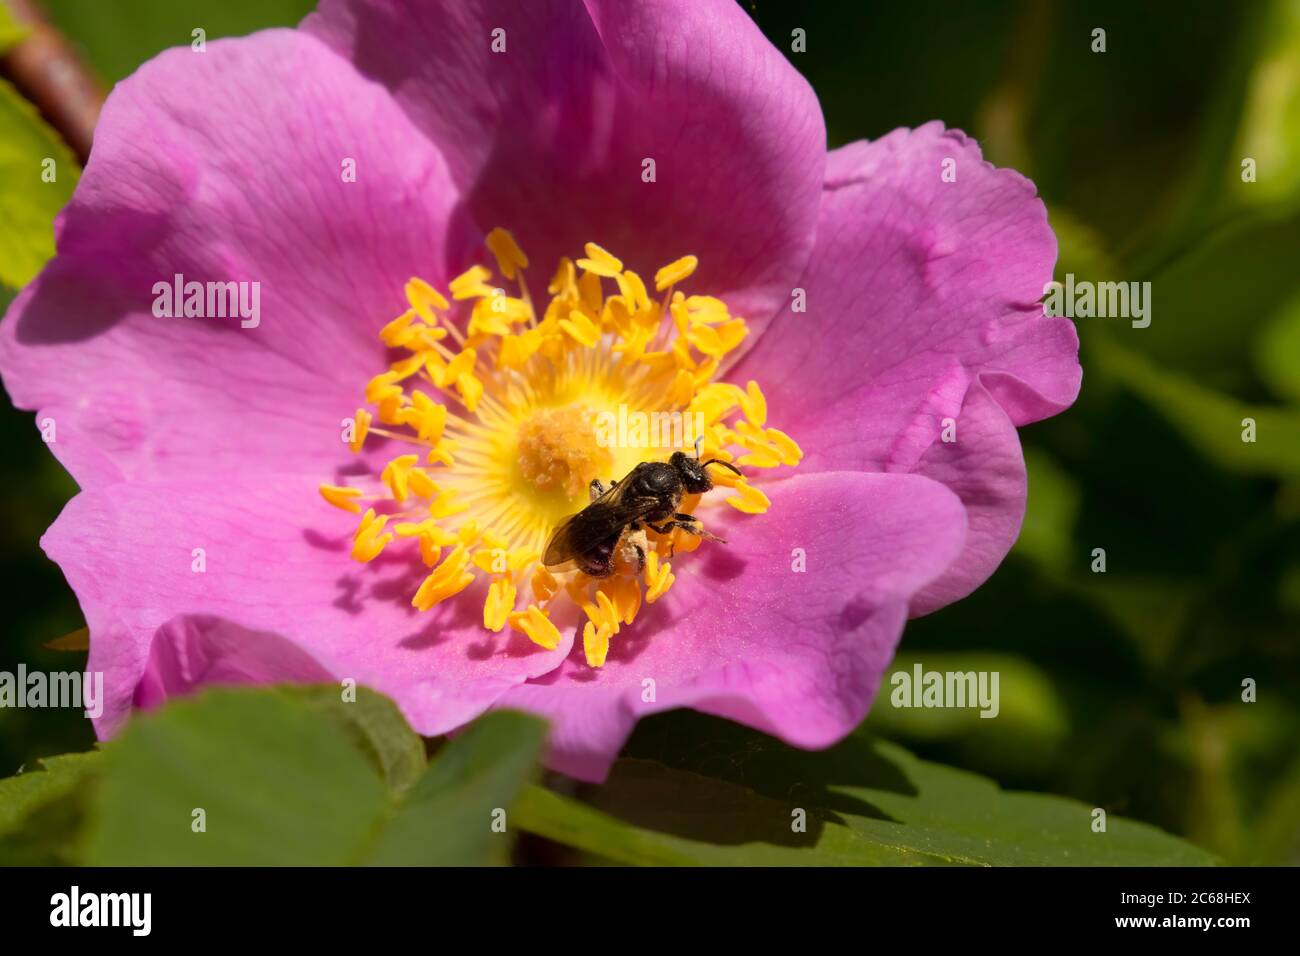 Wild rose with native bee, Willow Lake Wastewater Pollution Control Facility, Keizer, Oregon Stock Photo